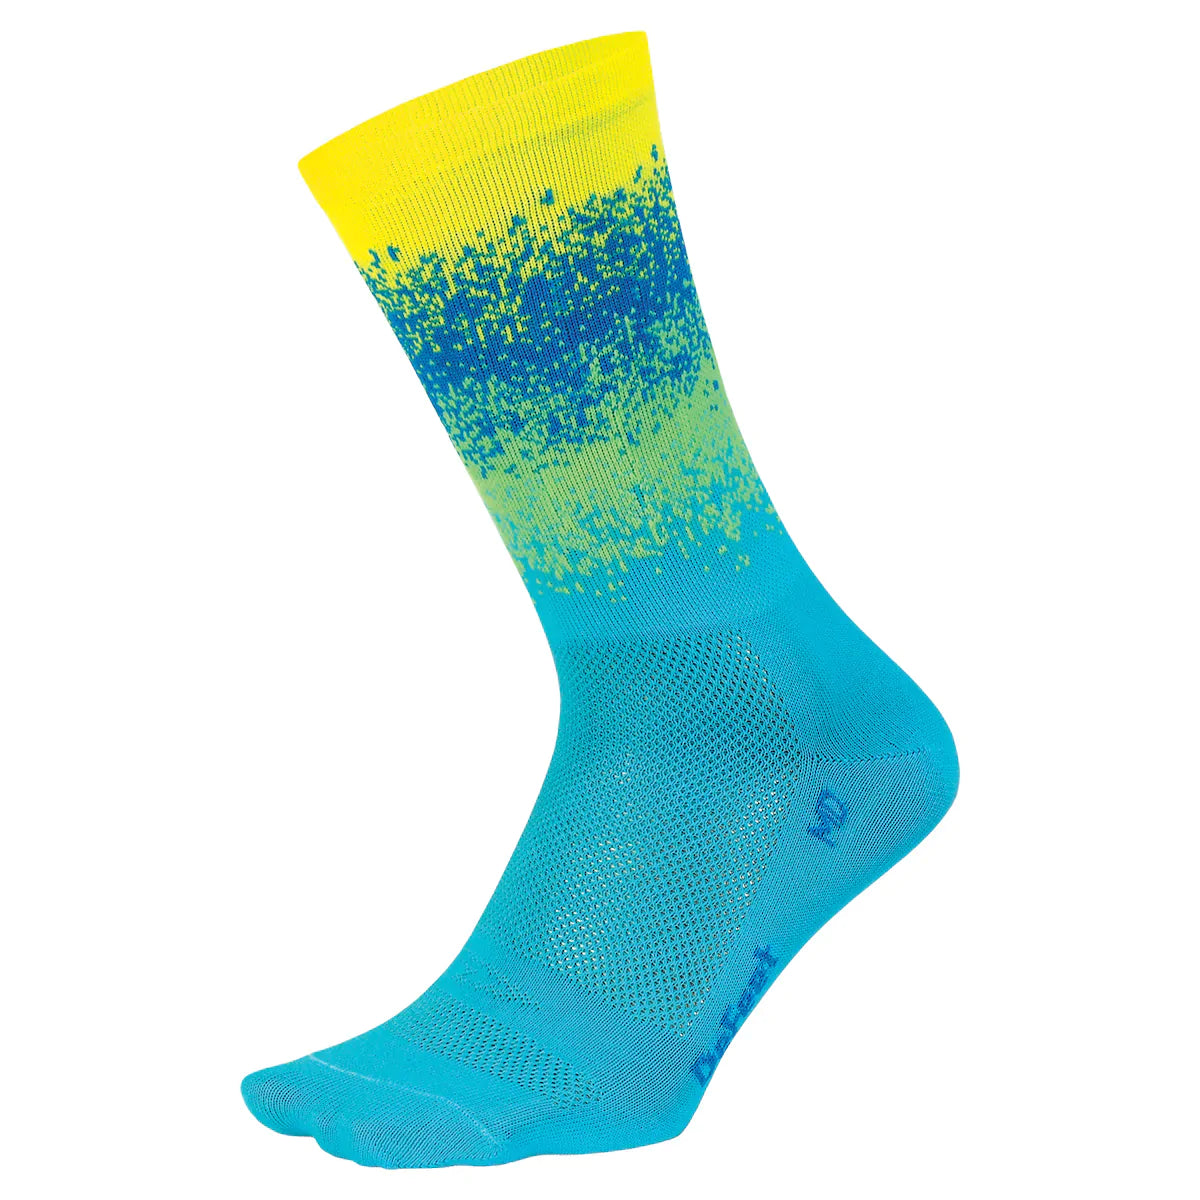 DeFeet Aireator Barnstormer Ombre cycling sock featuring a 6" cuff and a design of several bands of shades of yellow to light blue fading into each other.